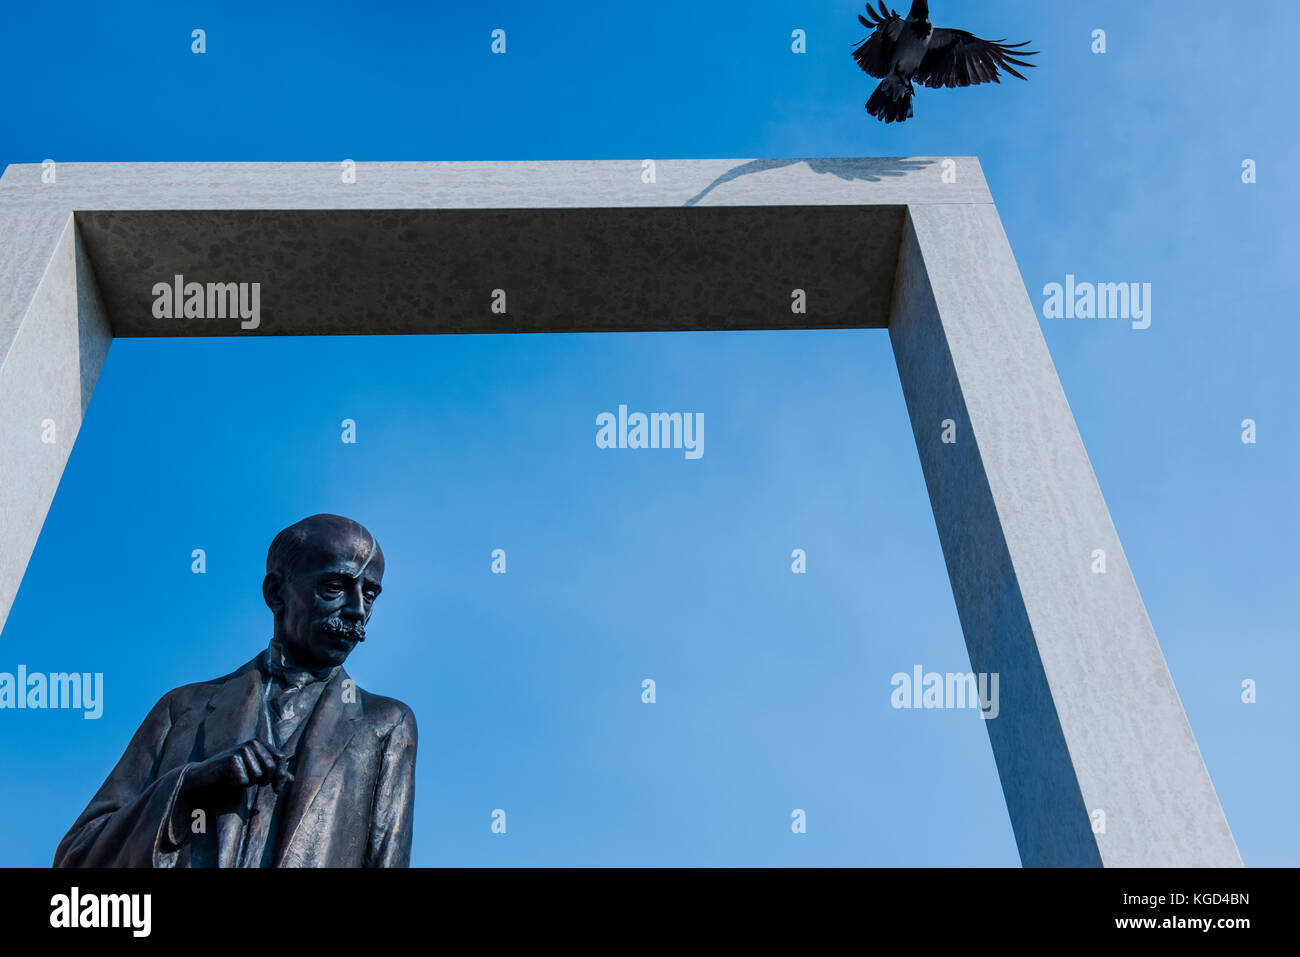 Statue with pensive expression against the blue sky while black bird takes off above the sculpture. Stock Photo